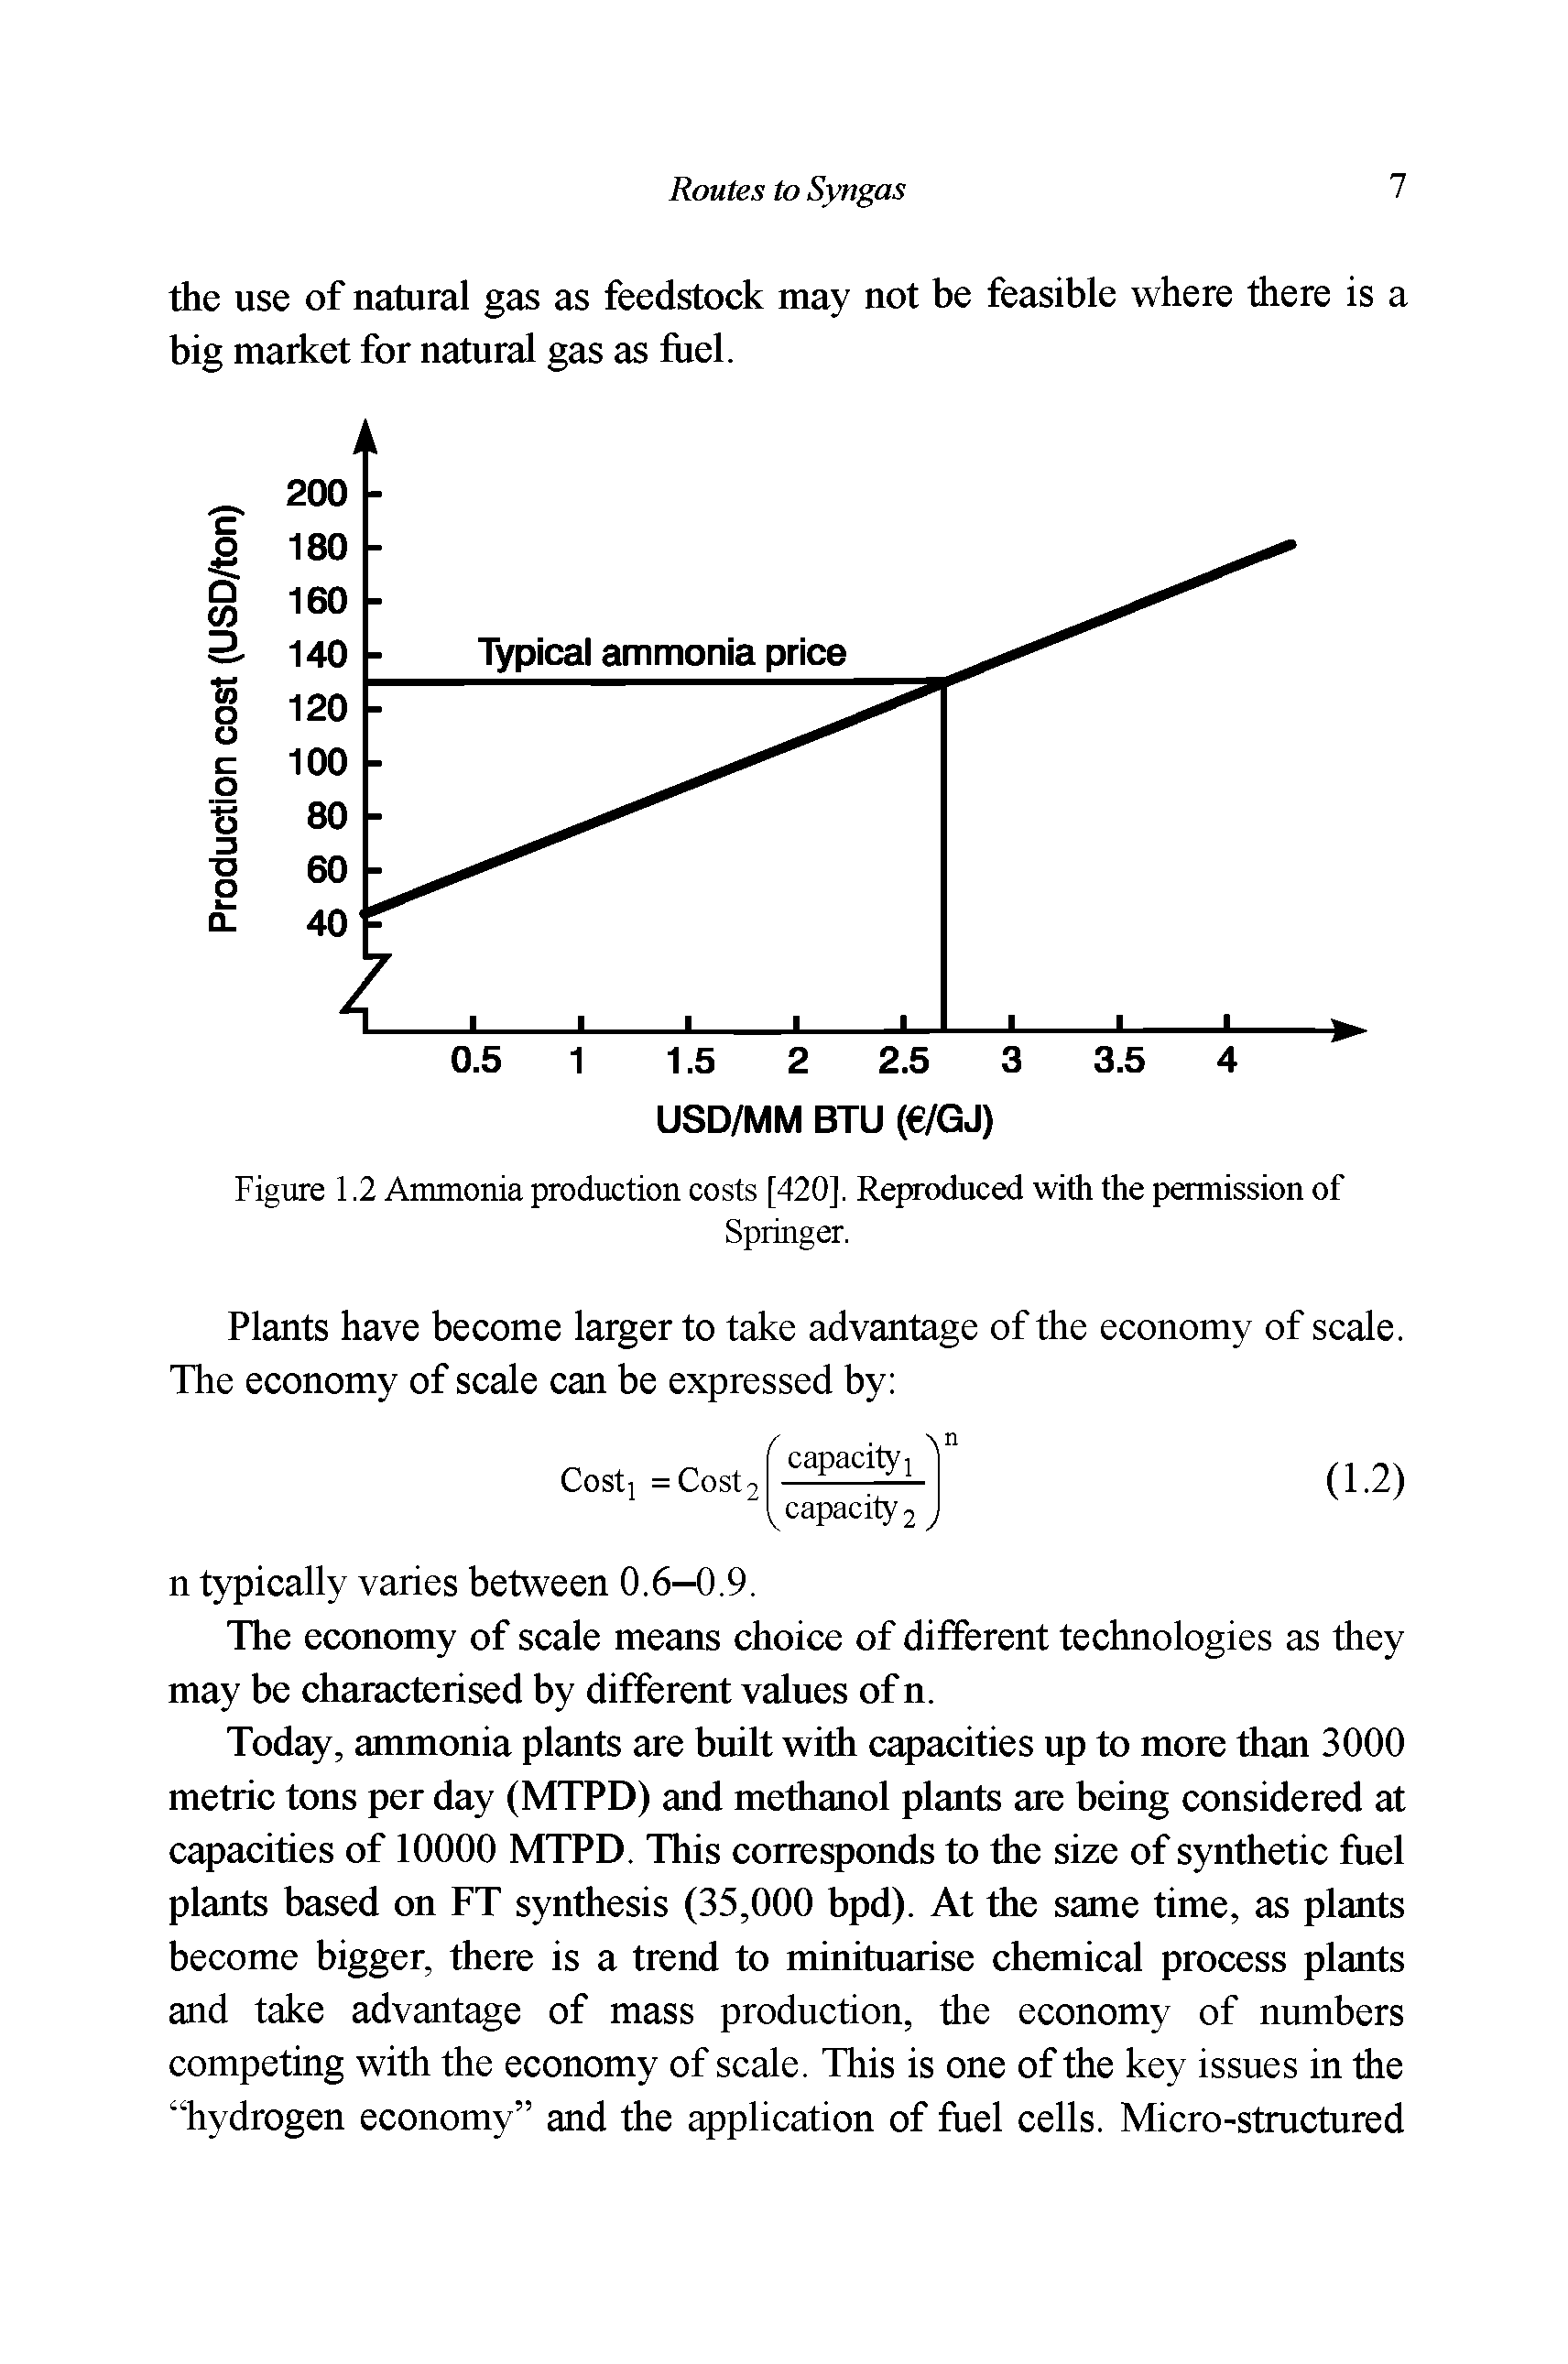 Figure 1.2 Ammonia production costs [420], Reproduced with the permission of...